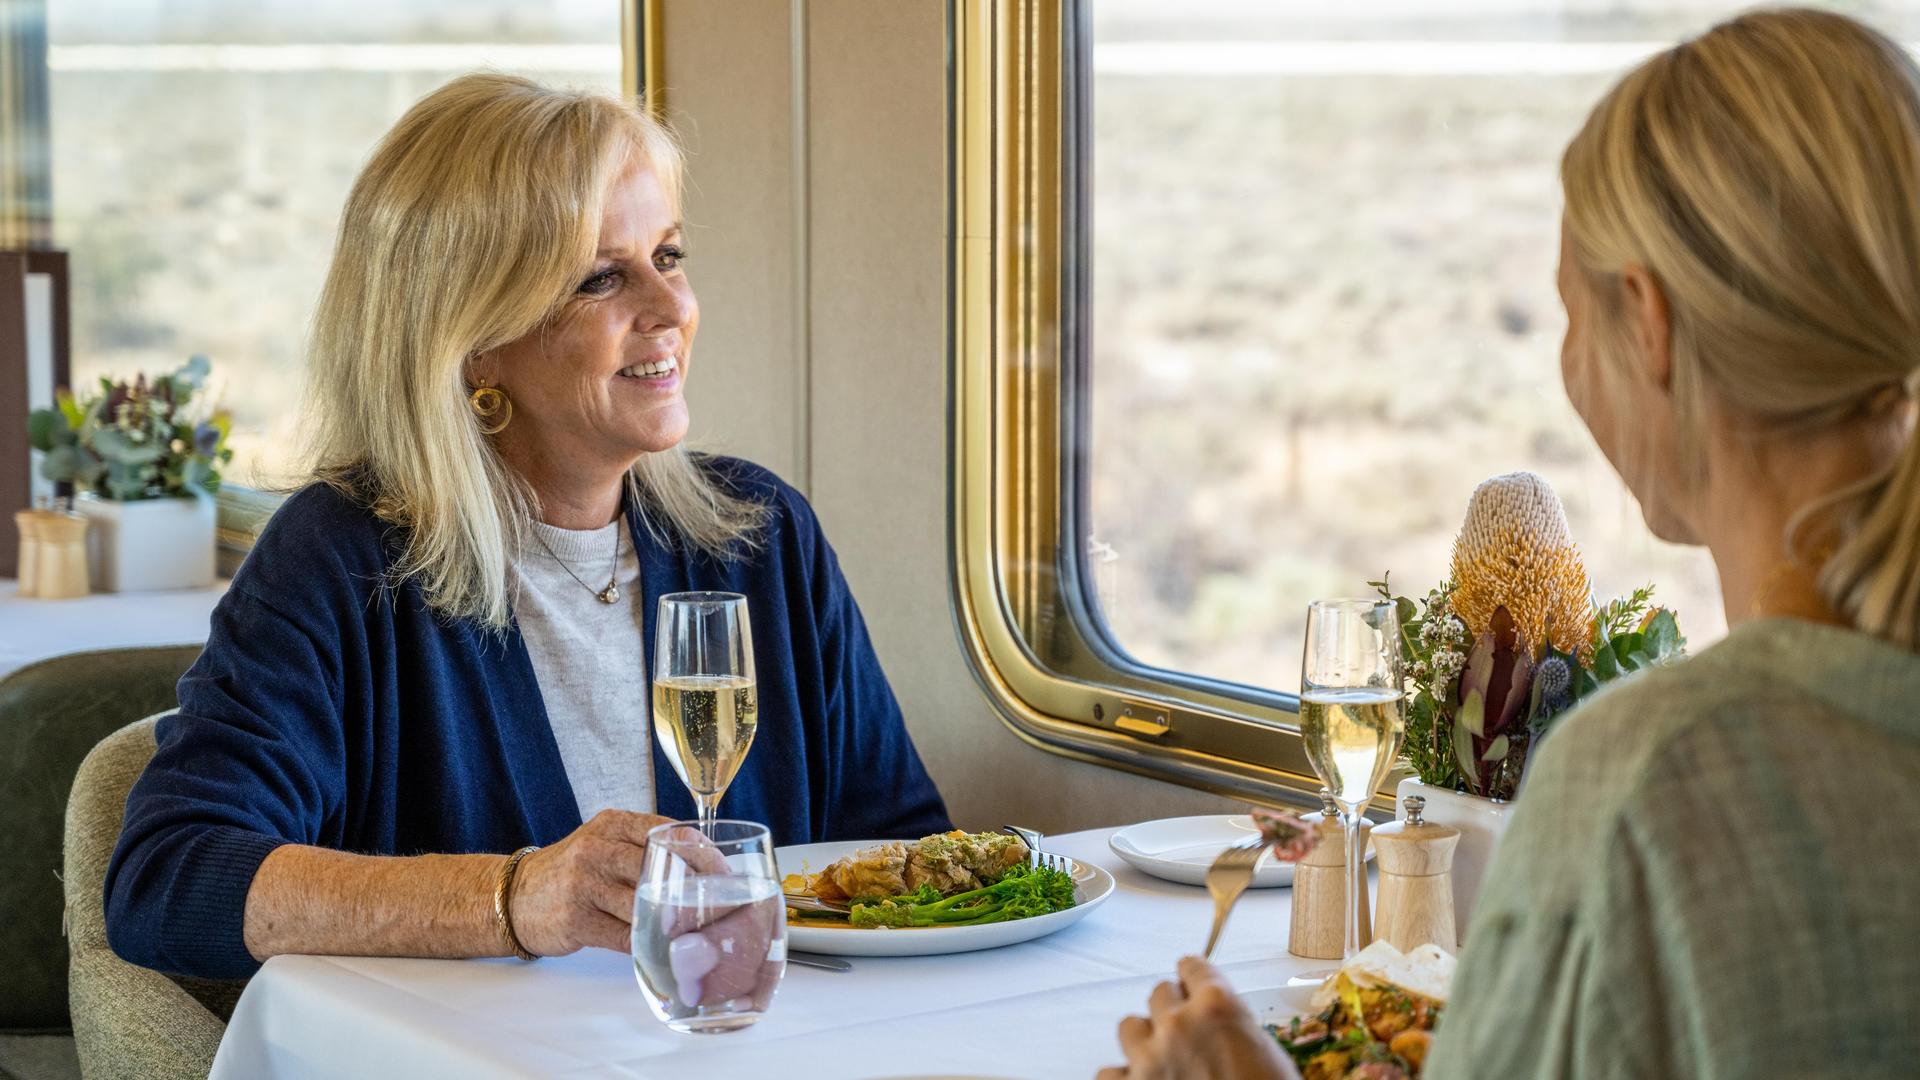 train, The Ghan, food, Outback, fire, wine